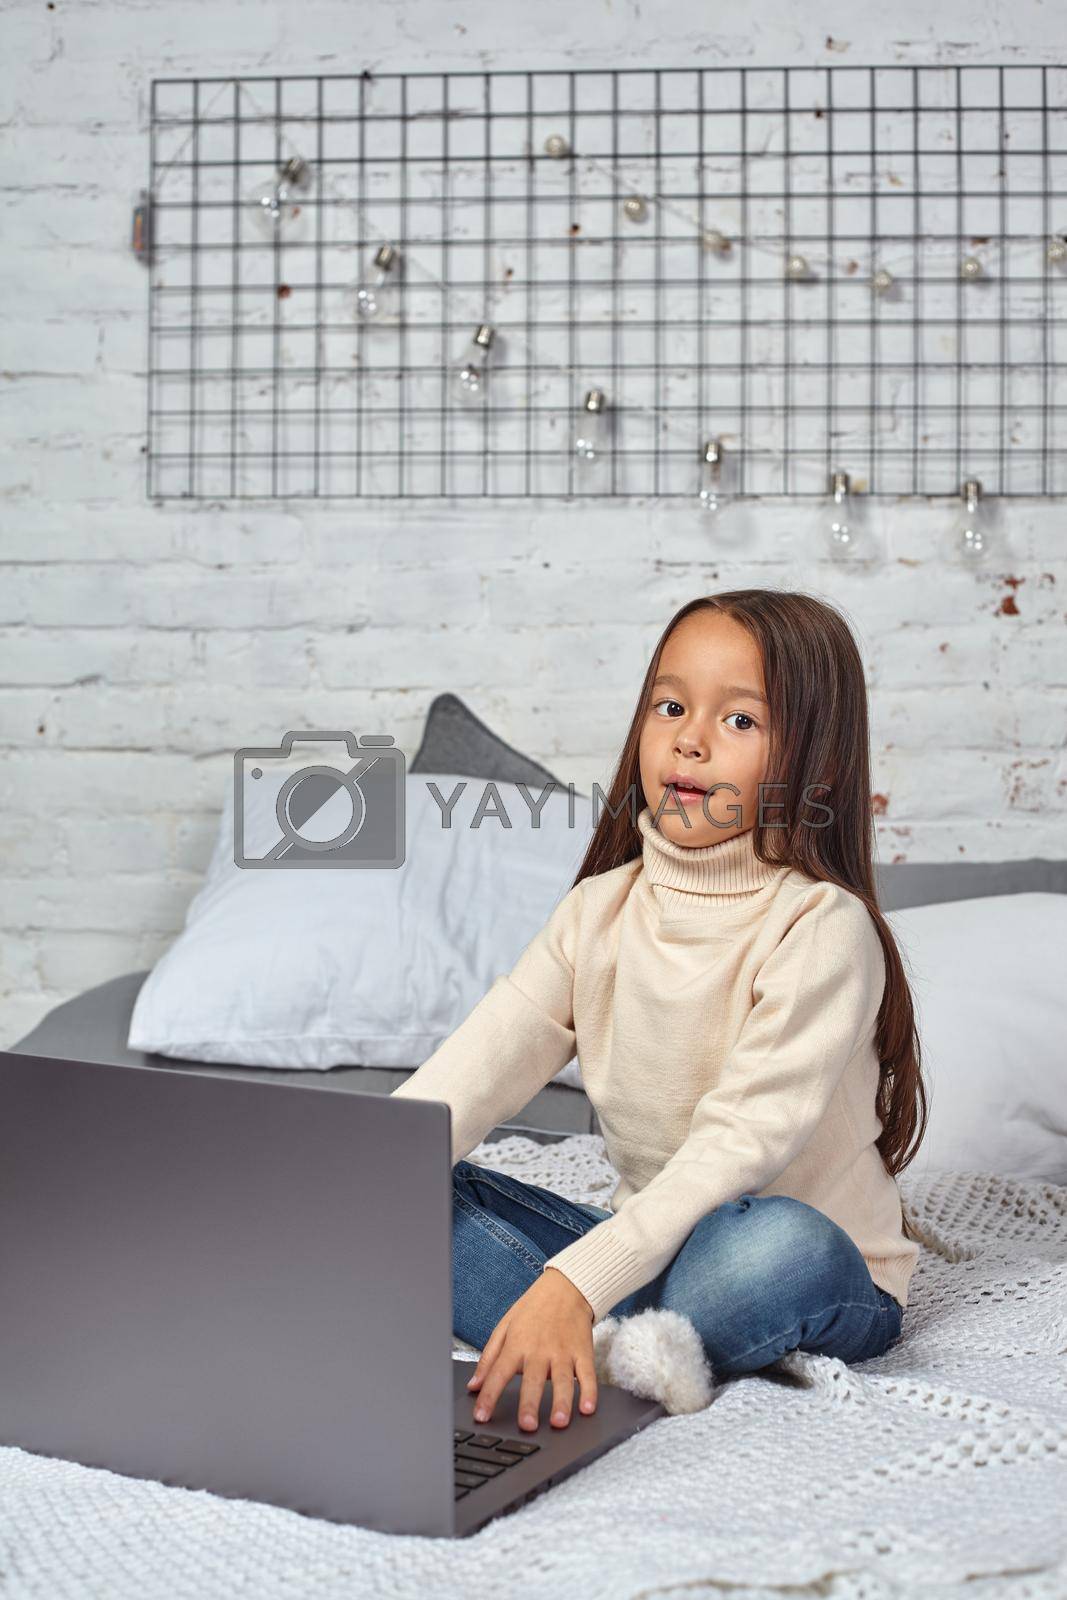 Royalty free image of Cute little girl girl feeling amusing while watching cartoons on a laptop sitting on bed by nazarovsergey